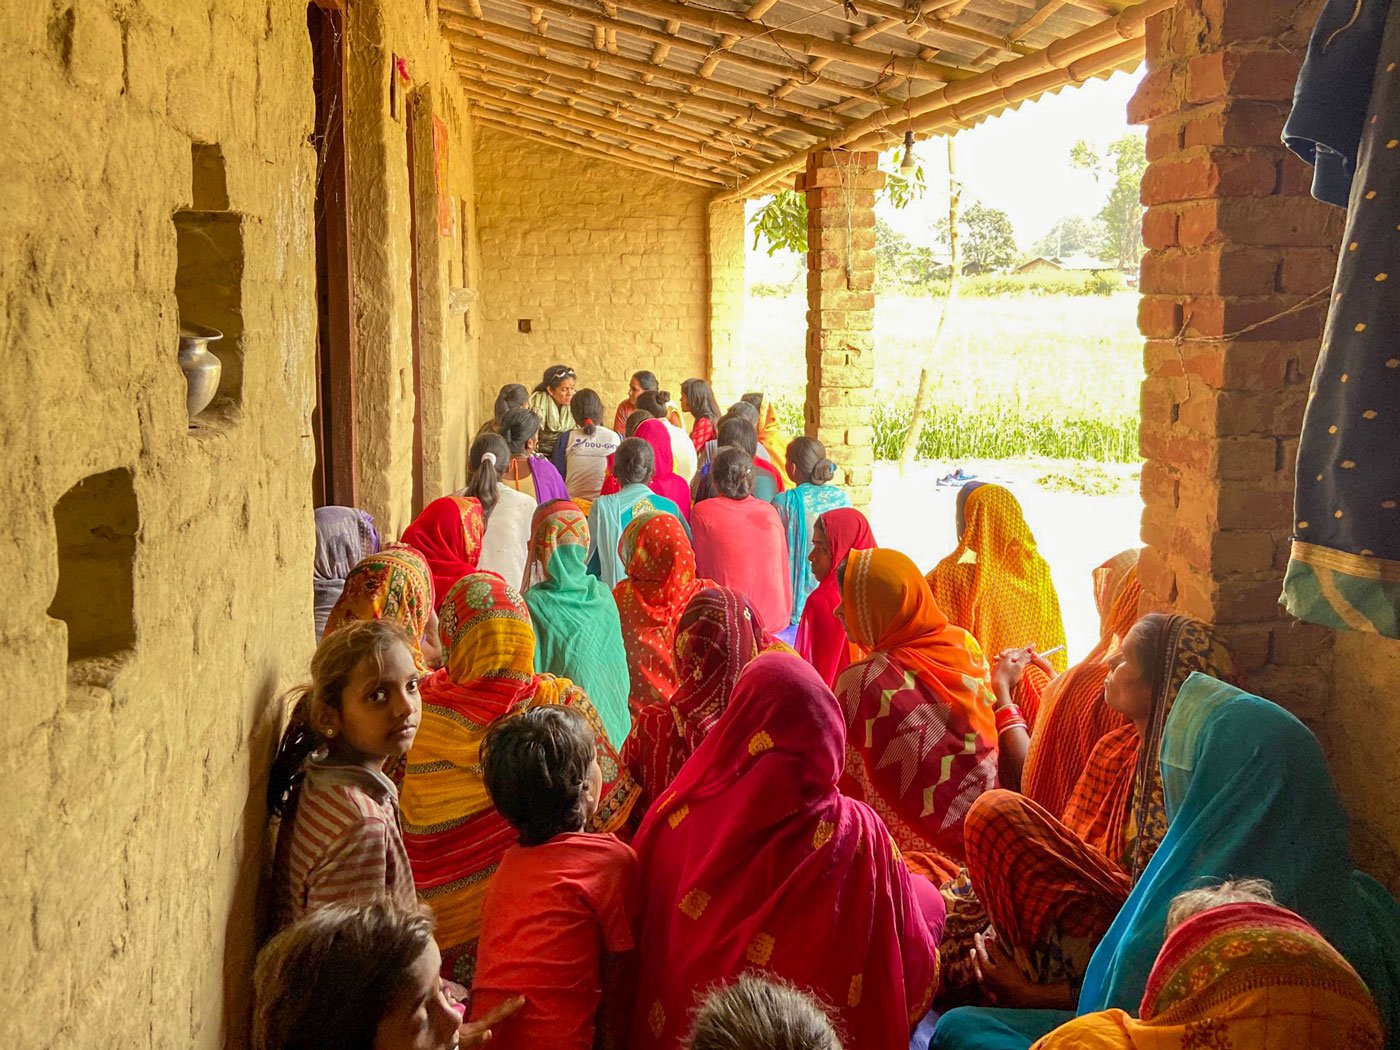 Several young mothers often attend local mahila mandal meetings where Salah encourages discussions on birth control